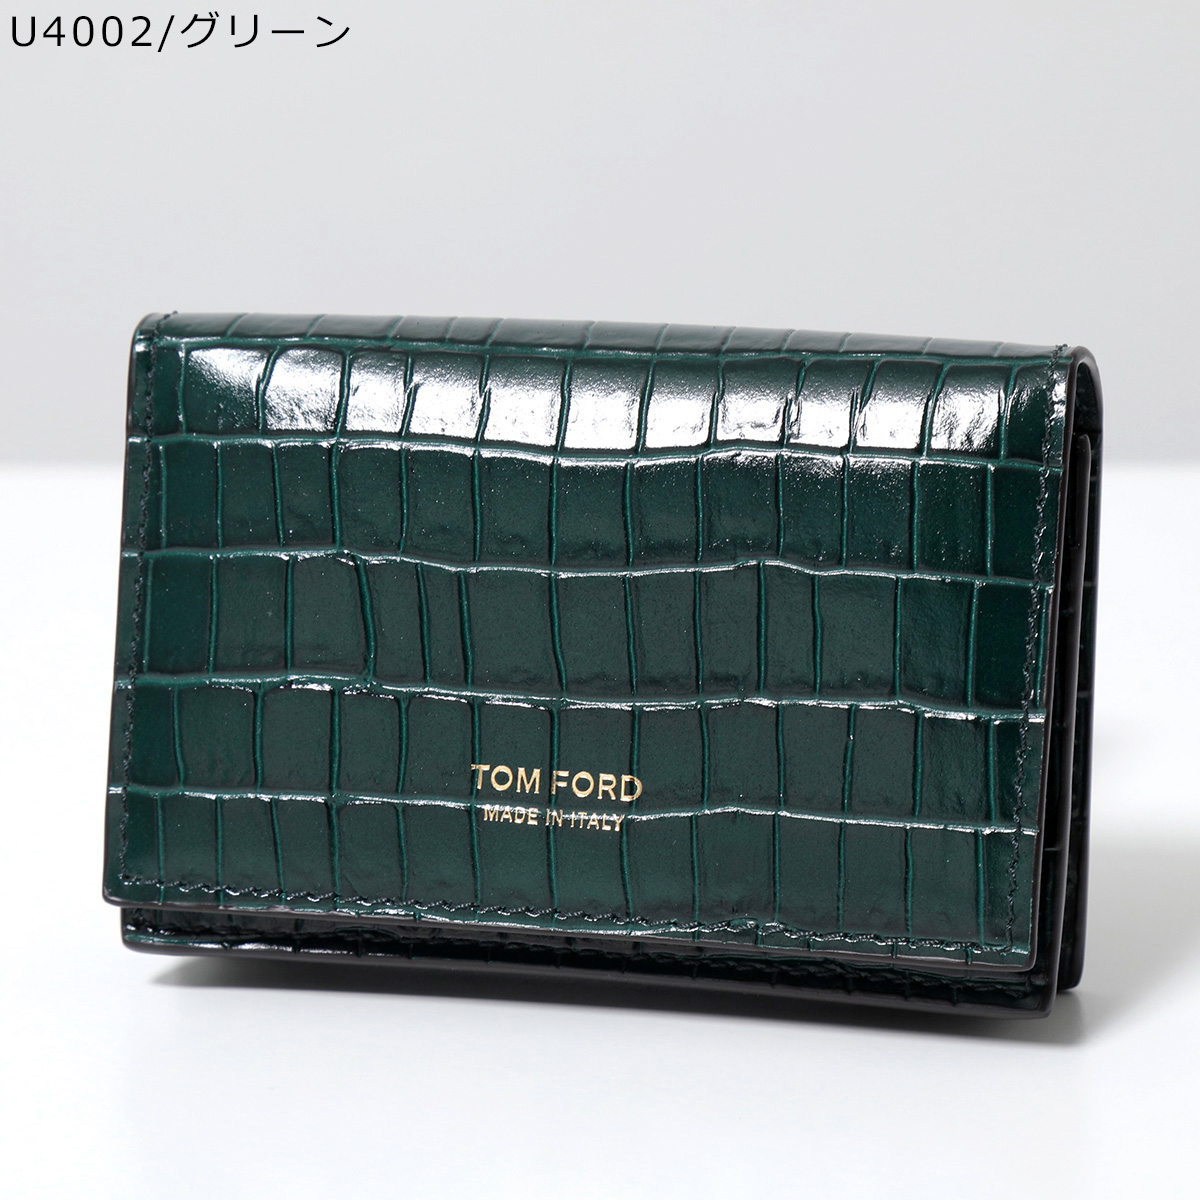 TOM FORD トムフォード カードケース Y0277T LCL239 Y0277 LCL239S LCL239G メンズ 名刺入れ  クロコダイル型押し パスケース カラー3色